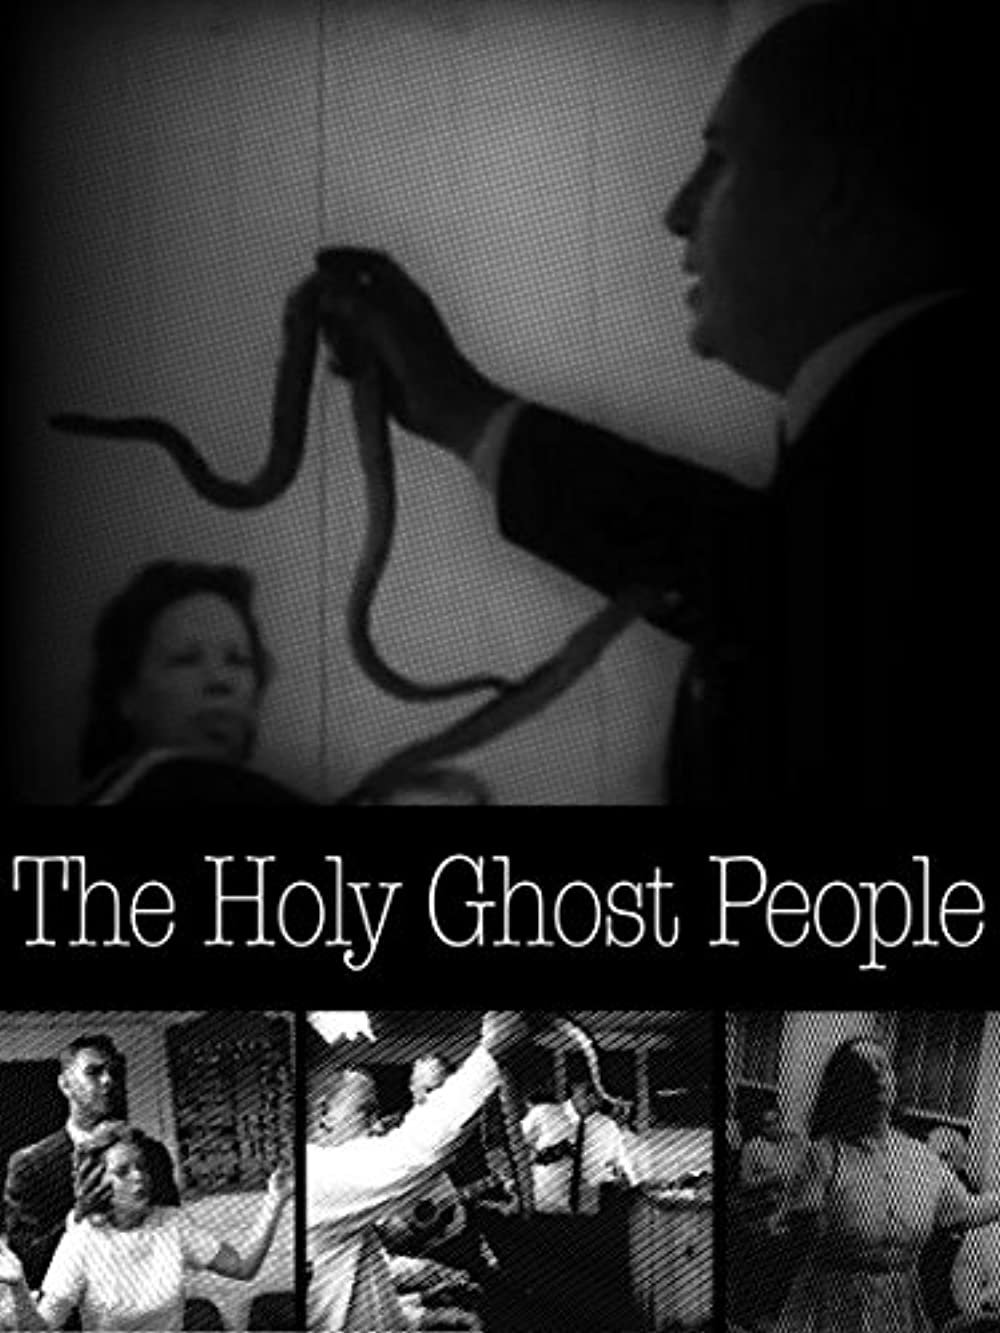 Holy Ghost People (1967)